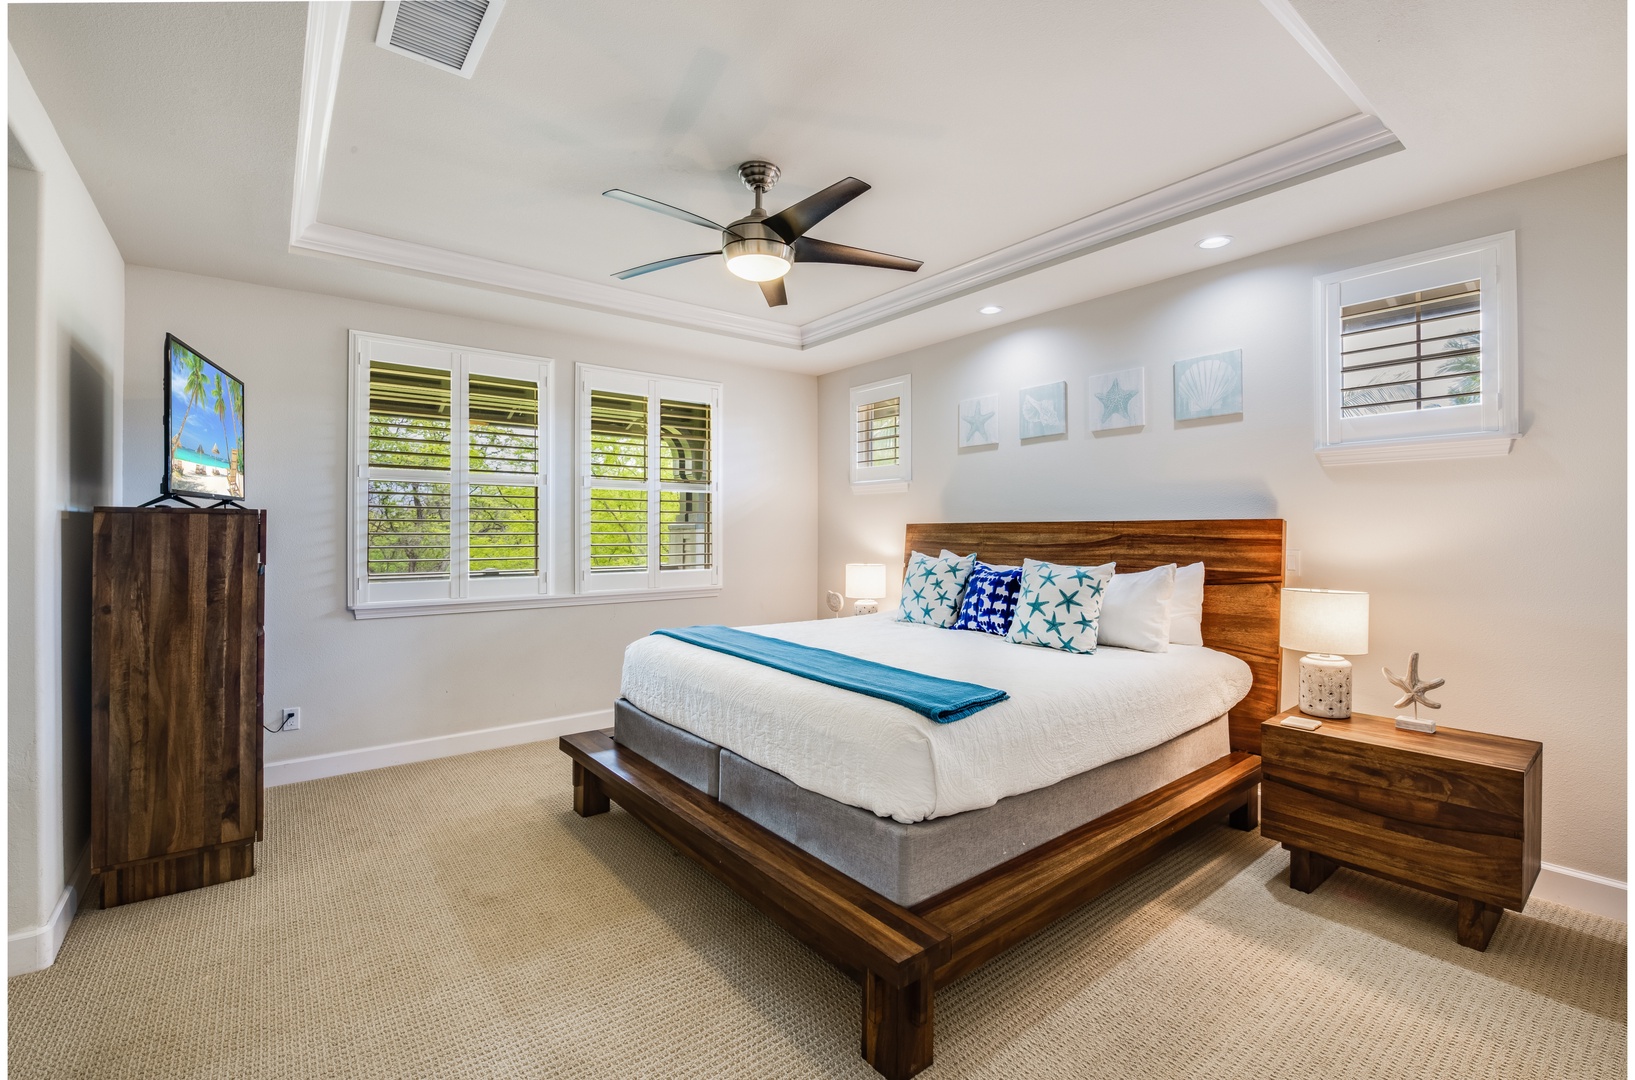 Kamuela Vacation Rentals, Kulalani at Mauna Lani 804 - Primary bedroom, equipped with a king bed, ceiling fans, a television set, a private balcony